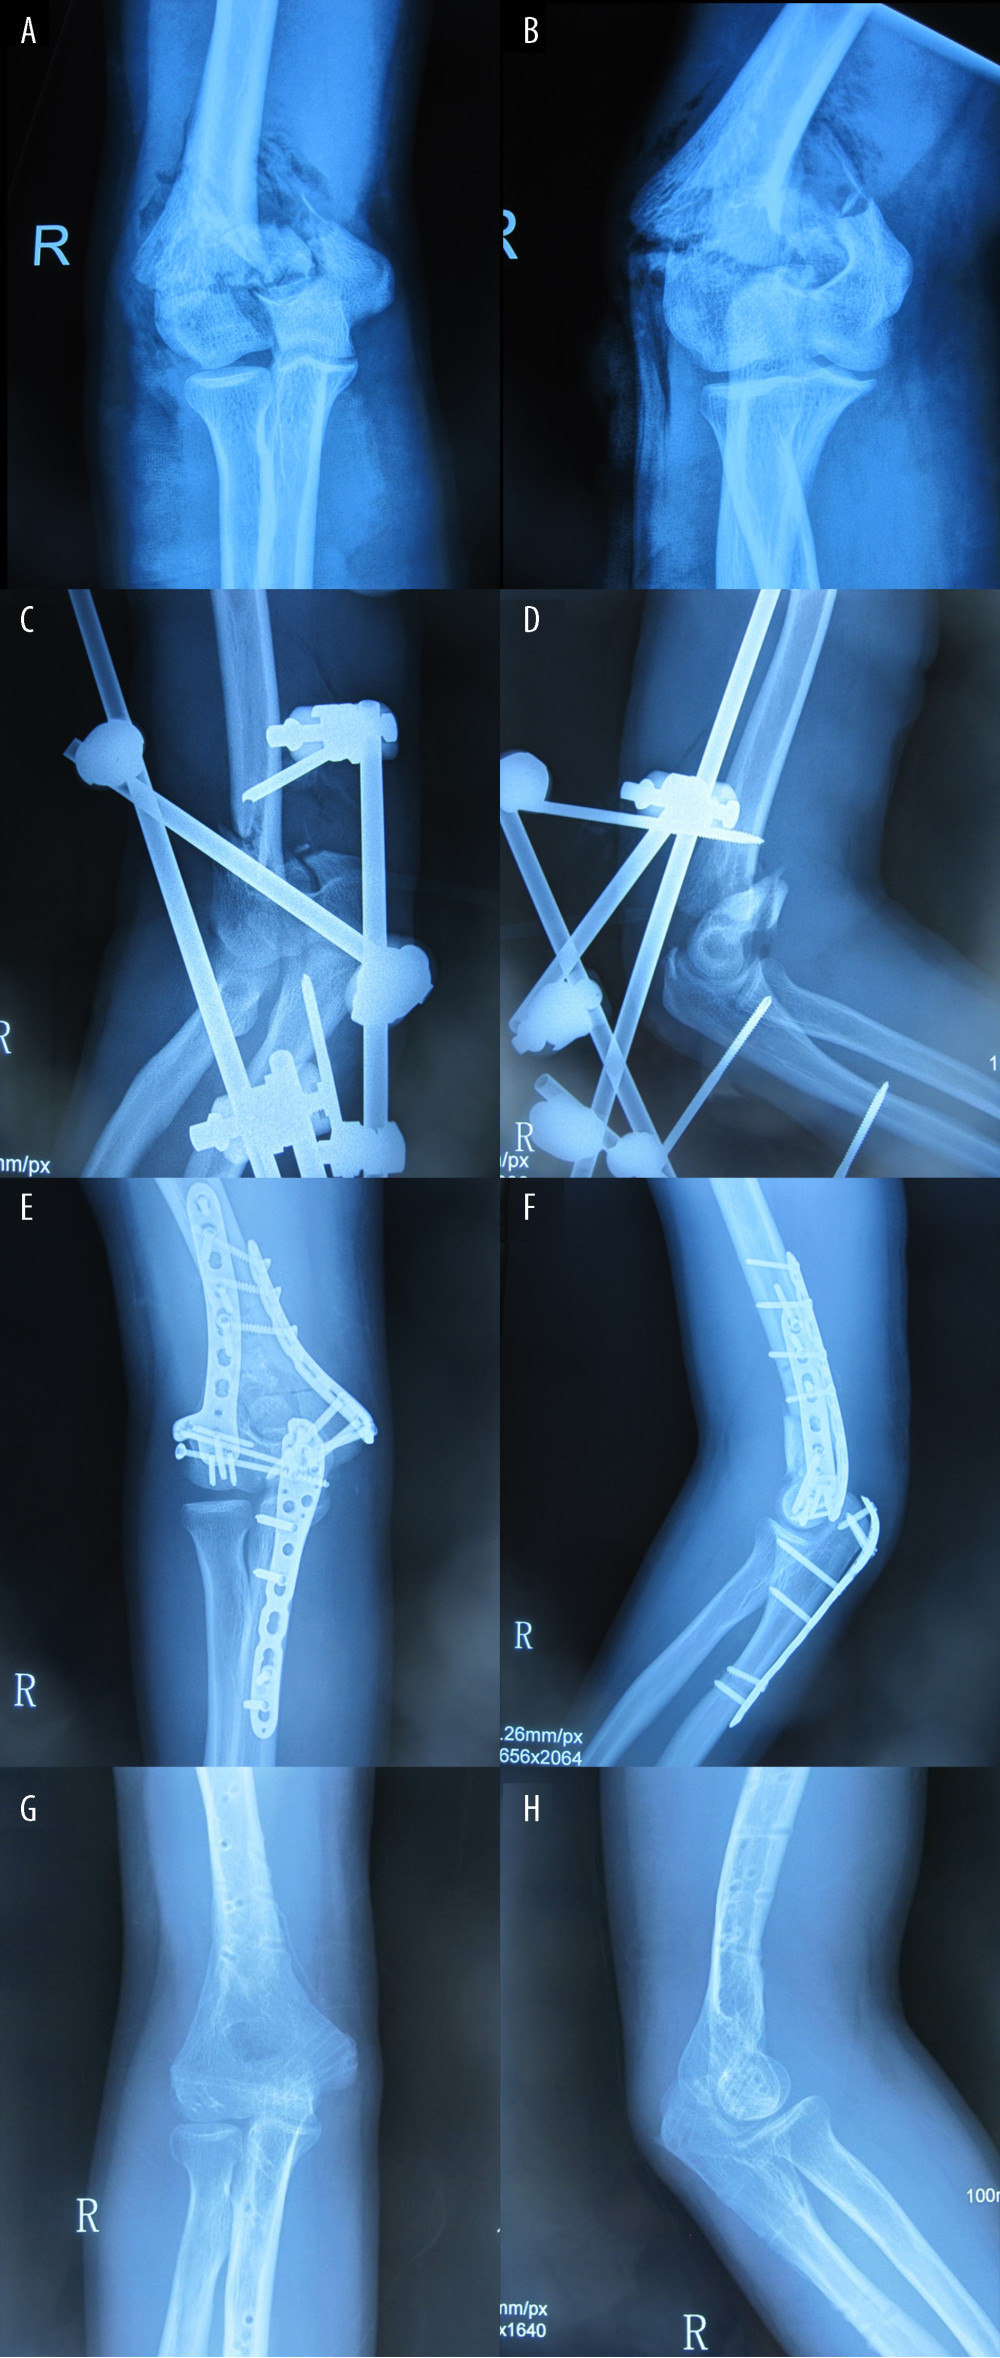 Radiographs from a 35-year-old man who had a grade II open distal humeral fracture in a motor vehicle accident. (A) Anteroposterior and (B) lateral radiographs of AO/OTA type 13-C2 intra-articular fracture of distal humerus on admission. (C) Postoperative anteroposterior and (D) lateral radiographs showing fractures of the distal humeral stabilized by uniplanar external fixation (EF) following debridement. (E) Anteroposterior and (F) lateral radiographs of plate fixation immediately after surgery. EF had been converted to a plate on day 10 after injury. (G) Anteroposterior and (H) lateral radiographs (the internal fixation plates were removed 1 year after plate fixation) showing excellent bony union.